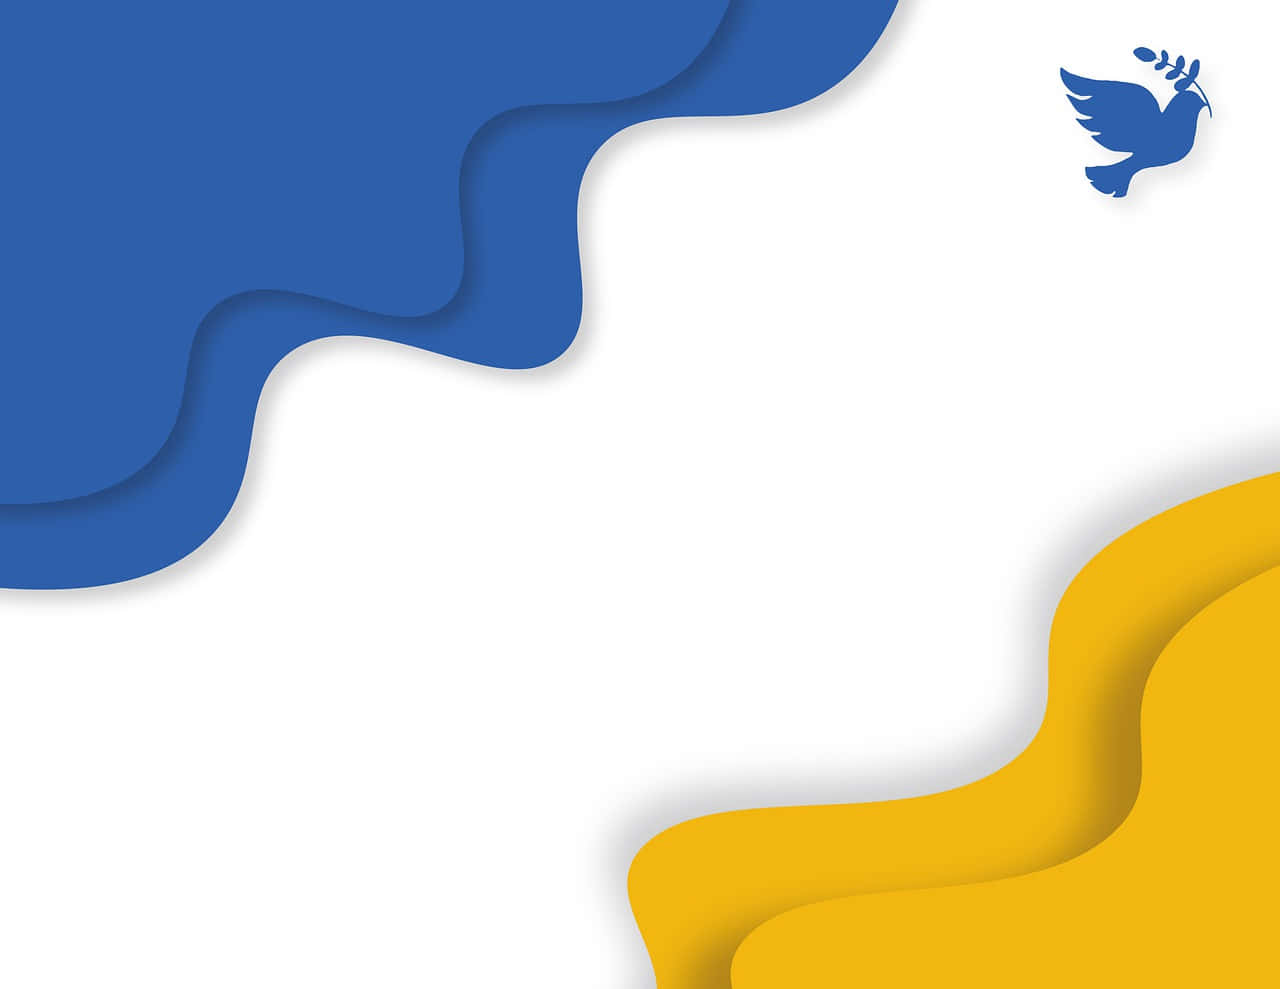 A Blue And Yellow Background With A Bird On It